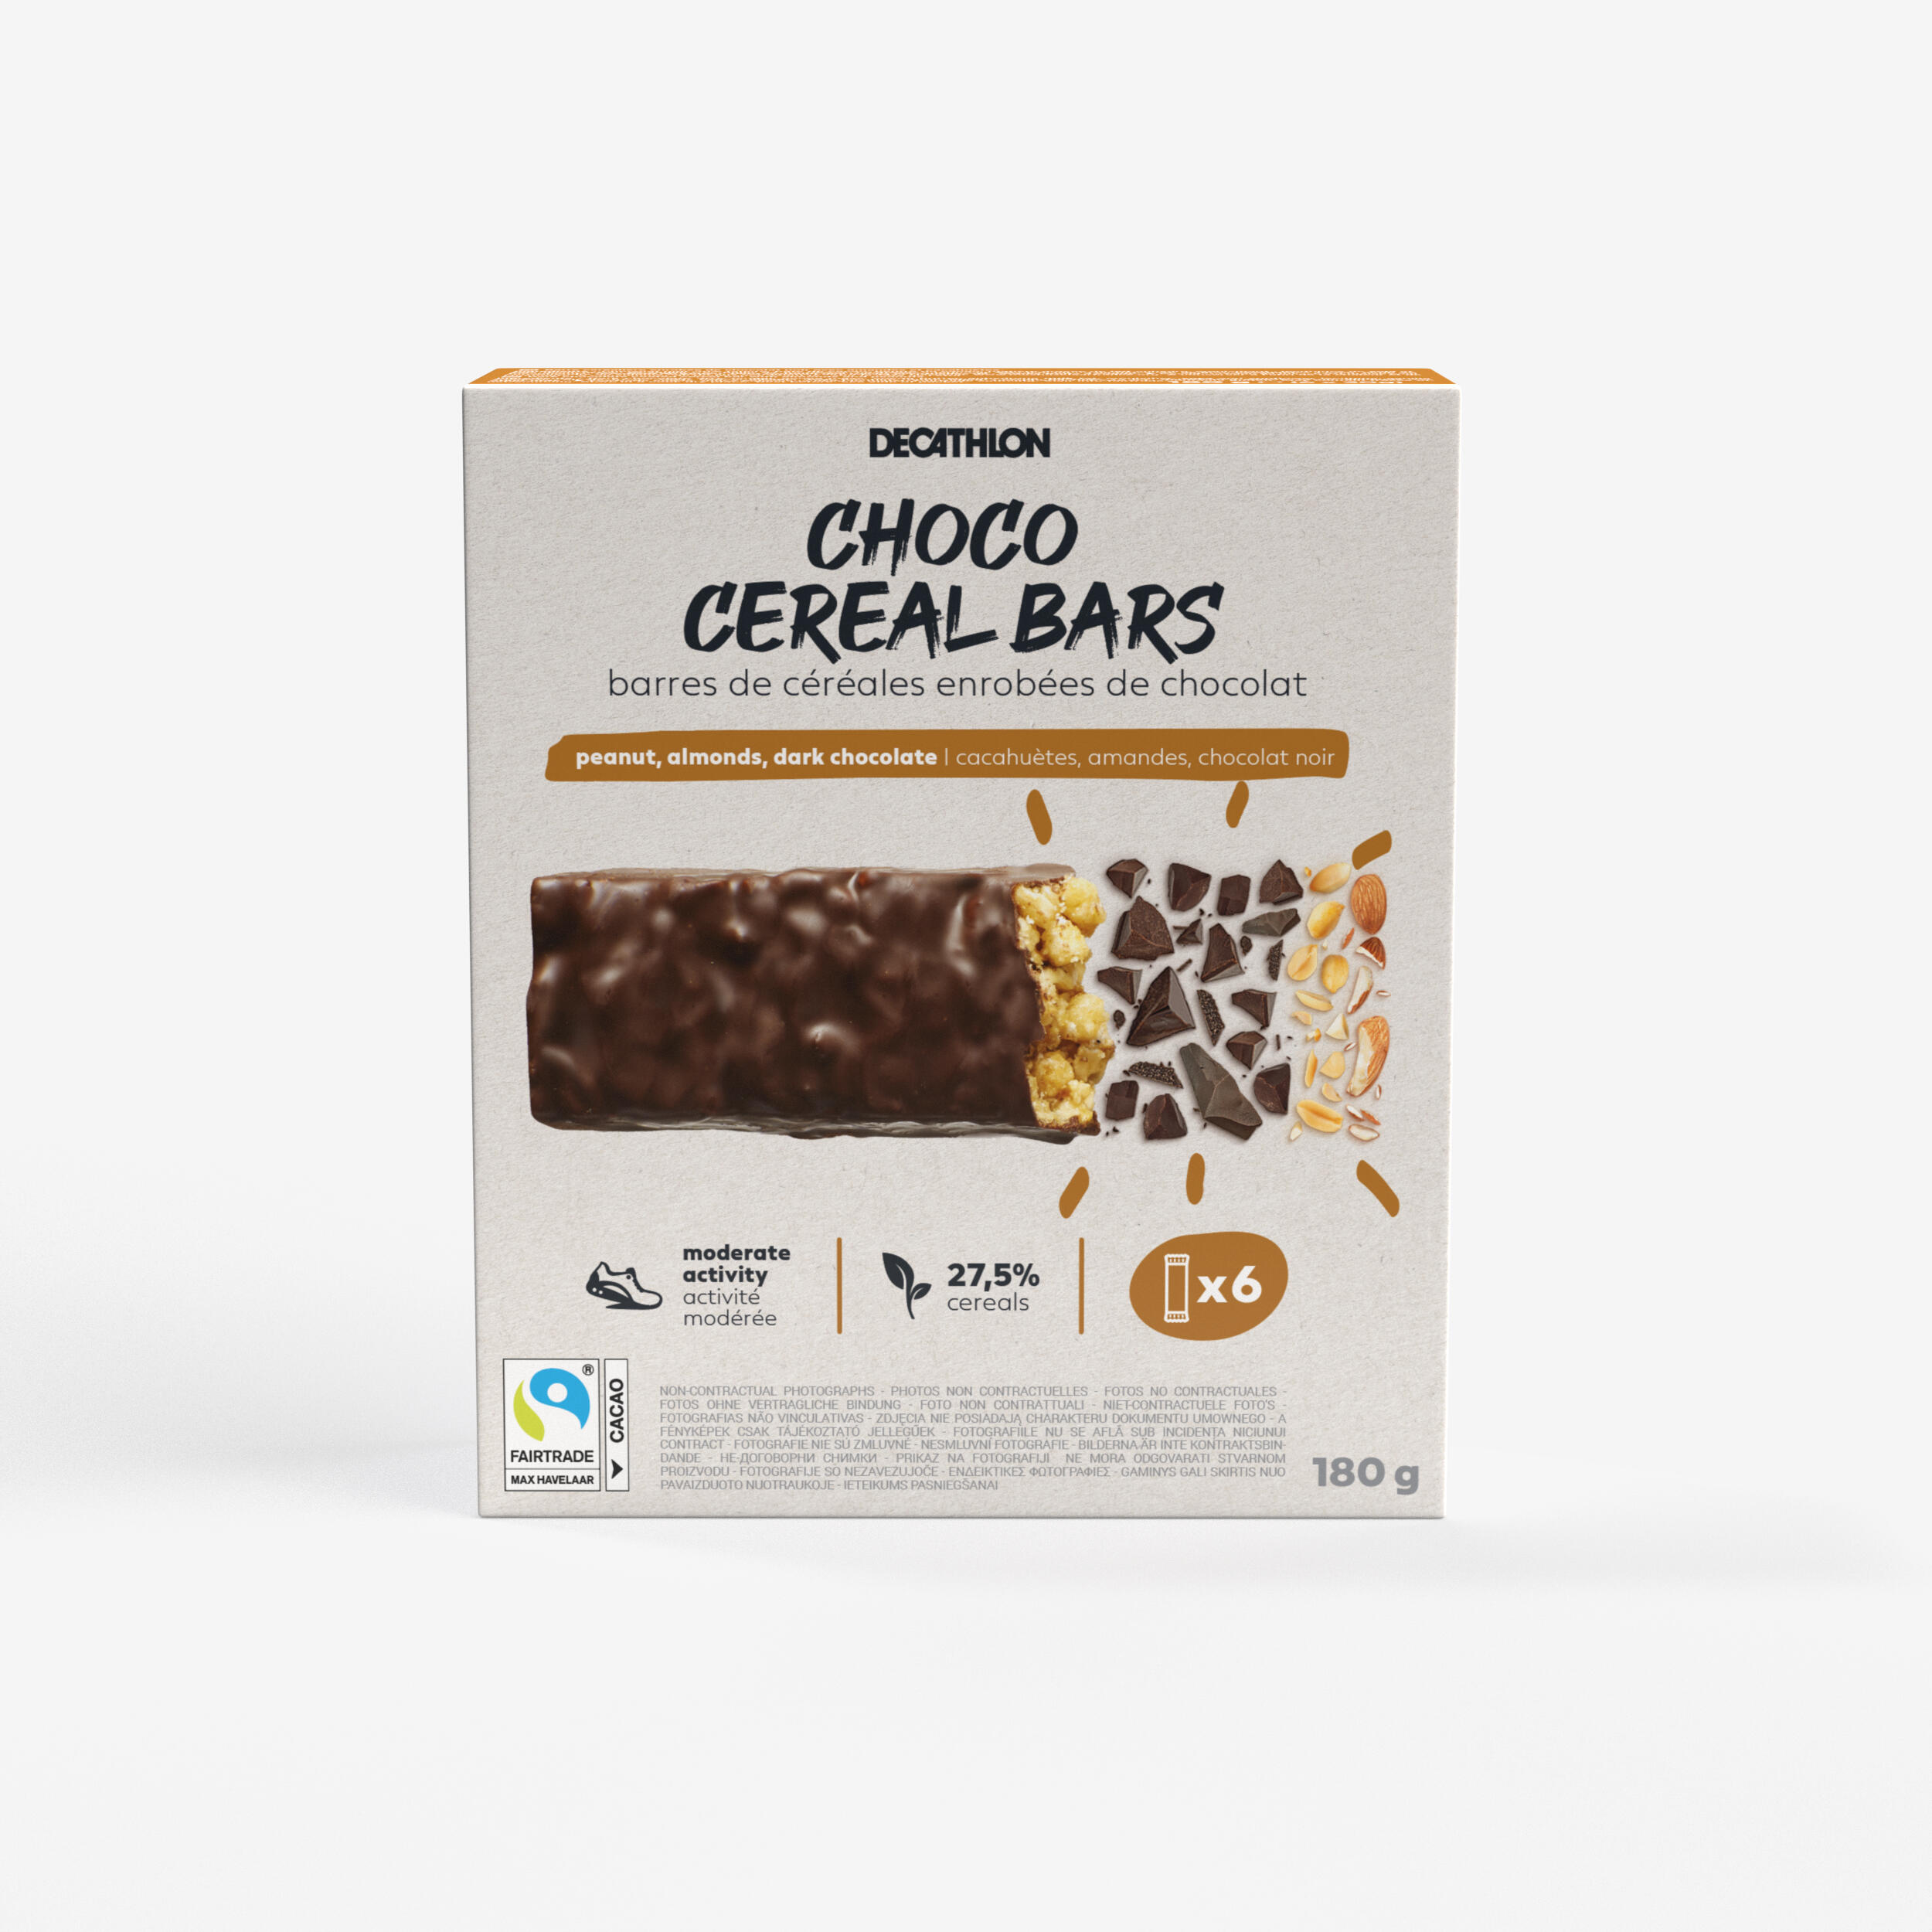 Coated Cereal Bar X6 Peanuts Almonds 1/2